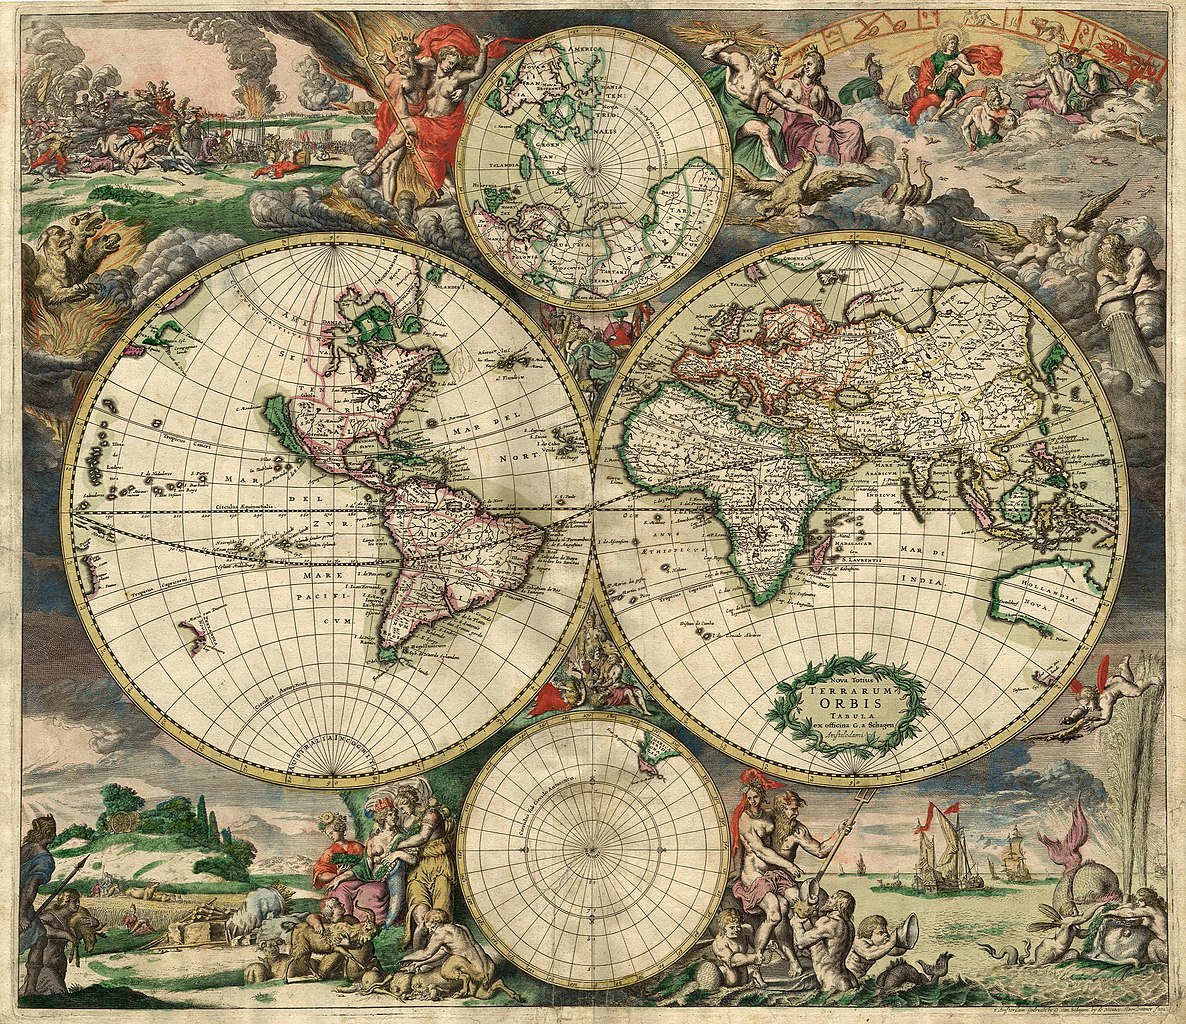 Colorful map of the world from 1689 with various figures around the edges